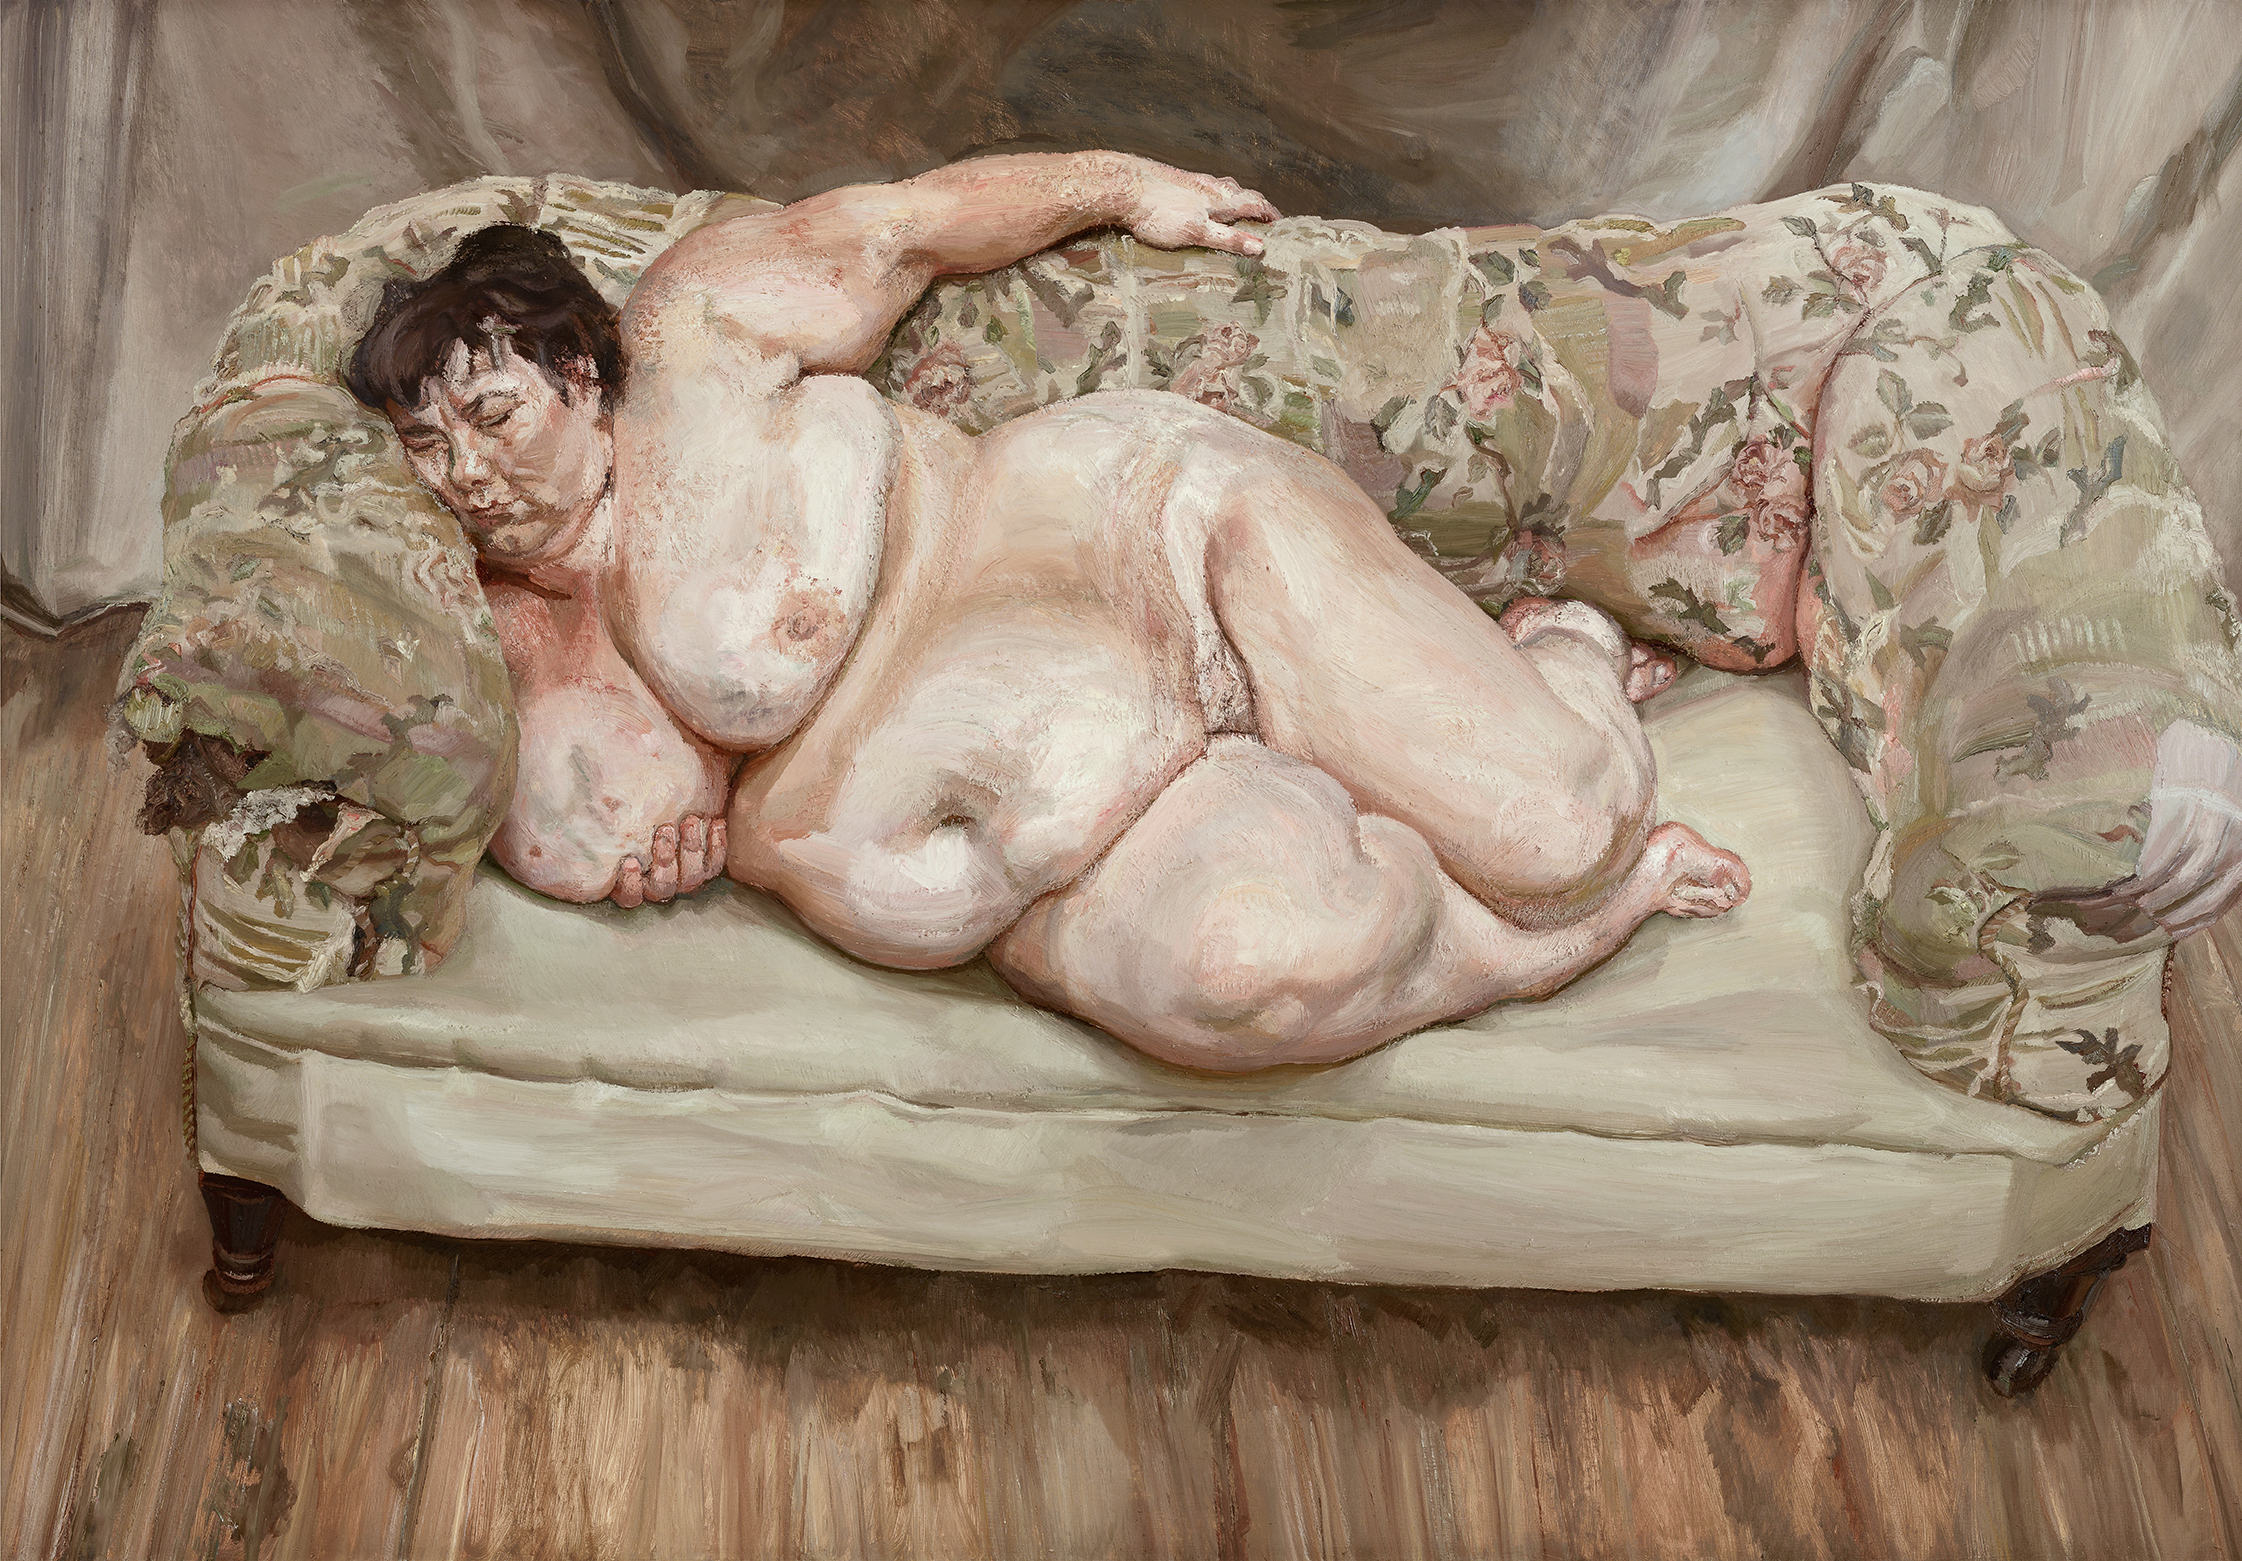 Lucian Freud, Benefits Supervisor Sleeping, 1995, oil on canvas, 151.3 × 219 cm, 59½ × 86¼ in. © The Lucian Freud Archive / Bridgeman Images; photography by John Riddy (volume 2, pages 176-177)